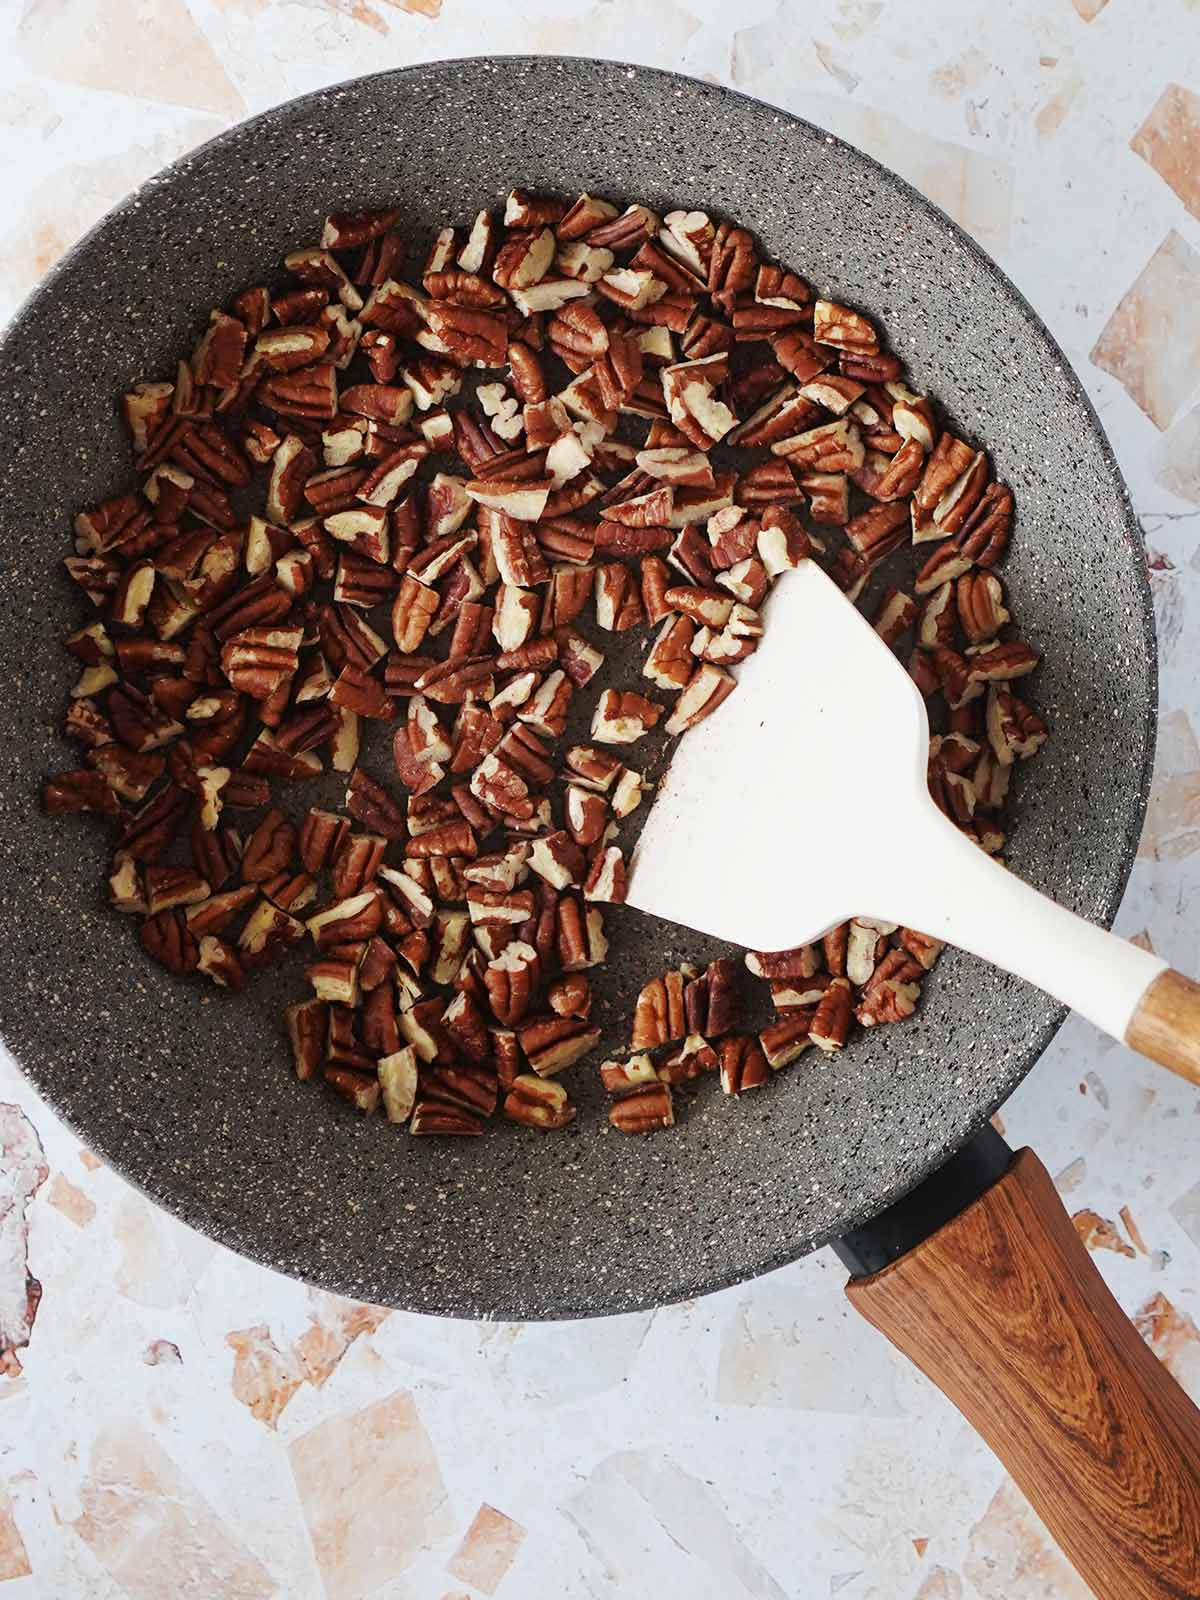 Toasting chopped pecans on a gray skillet.